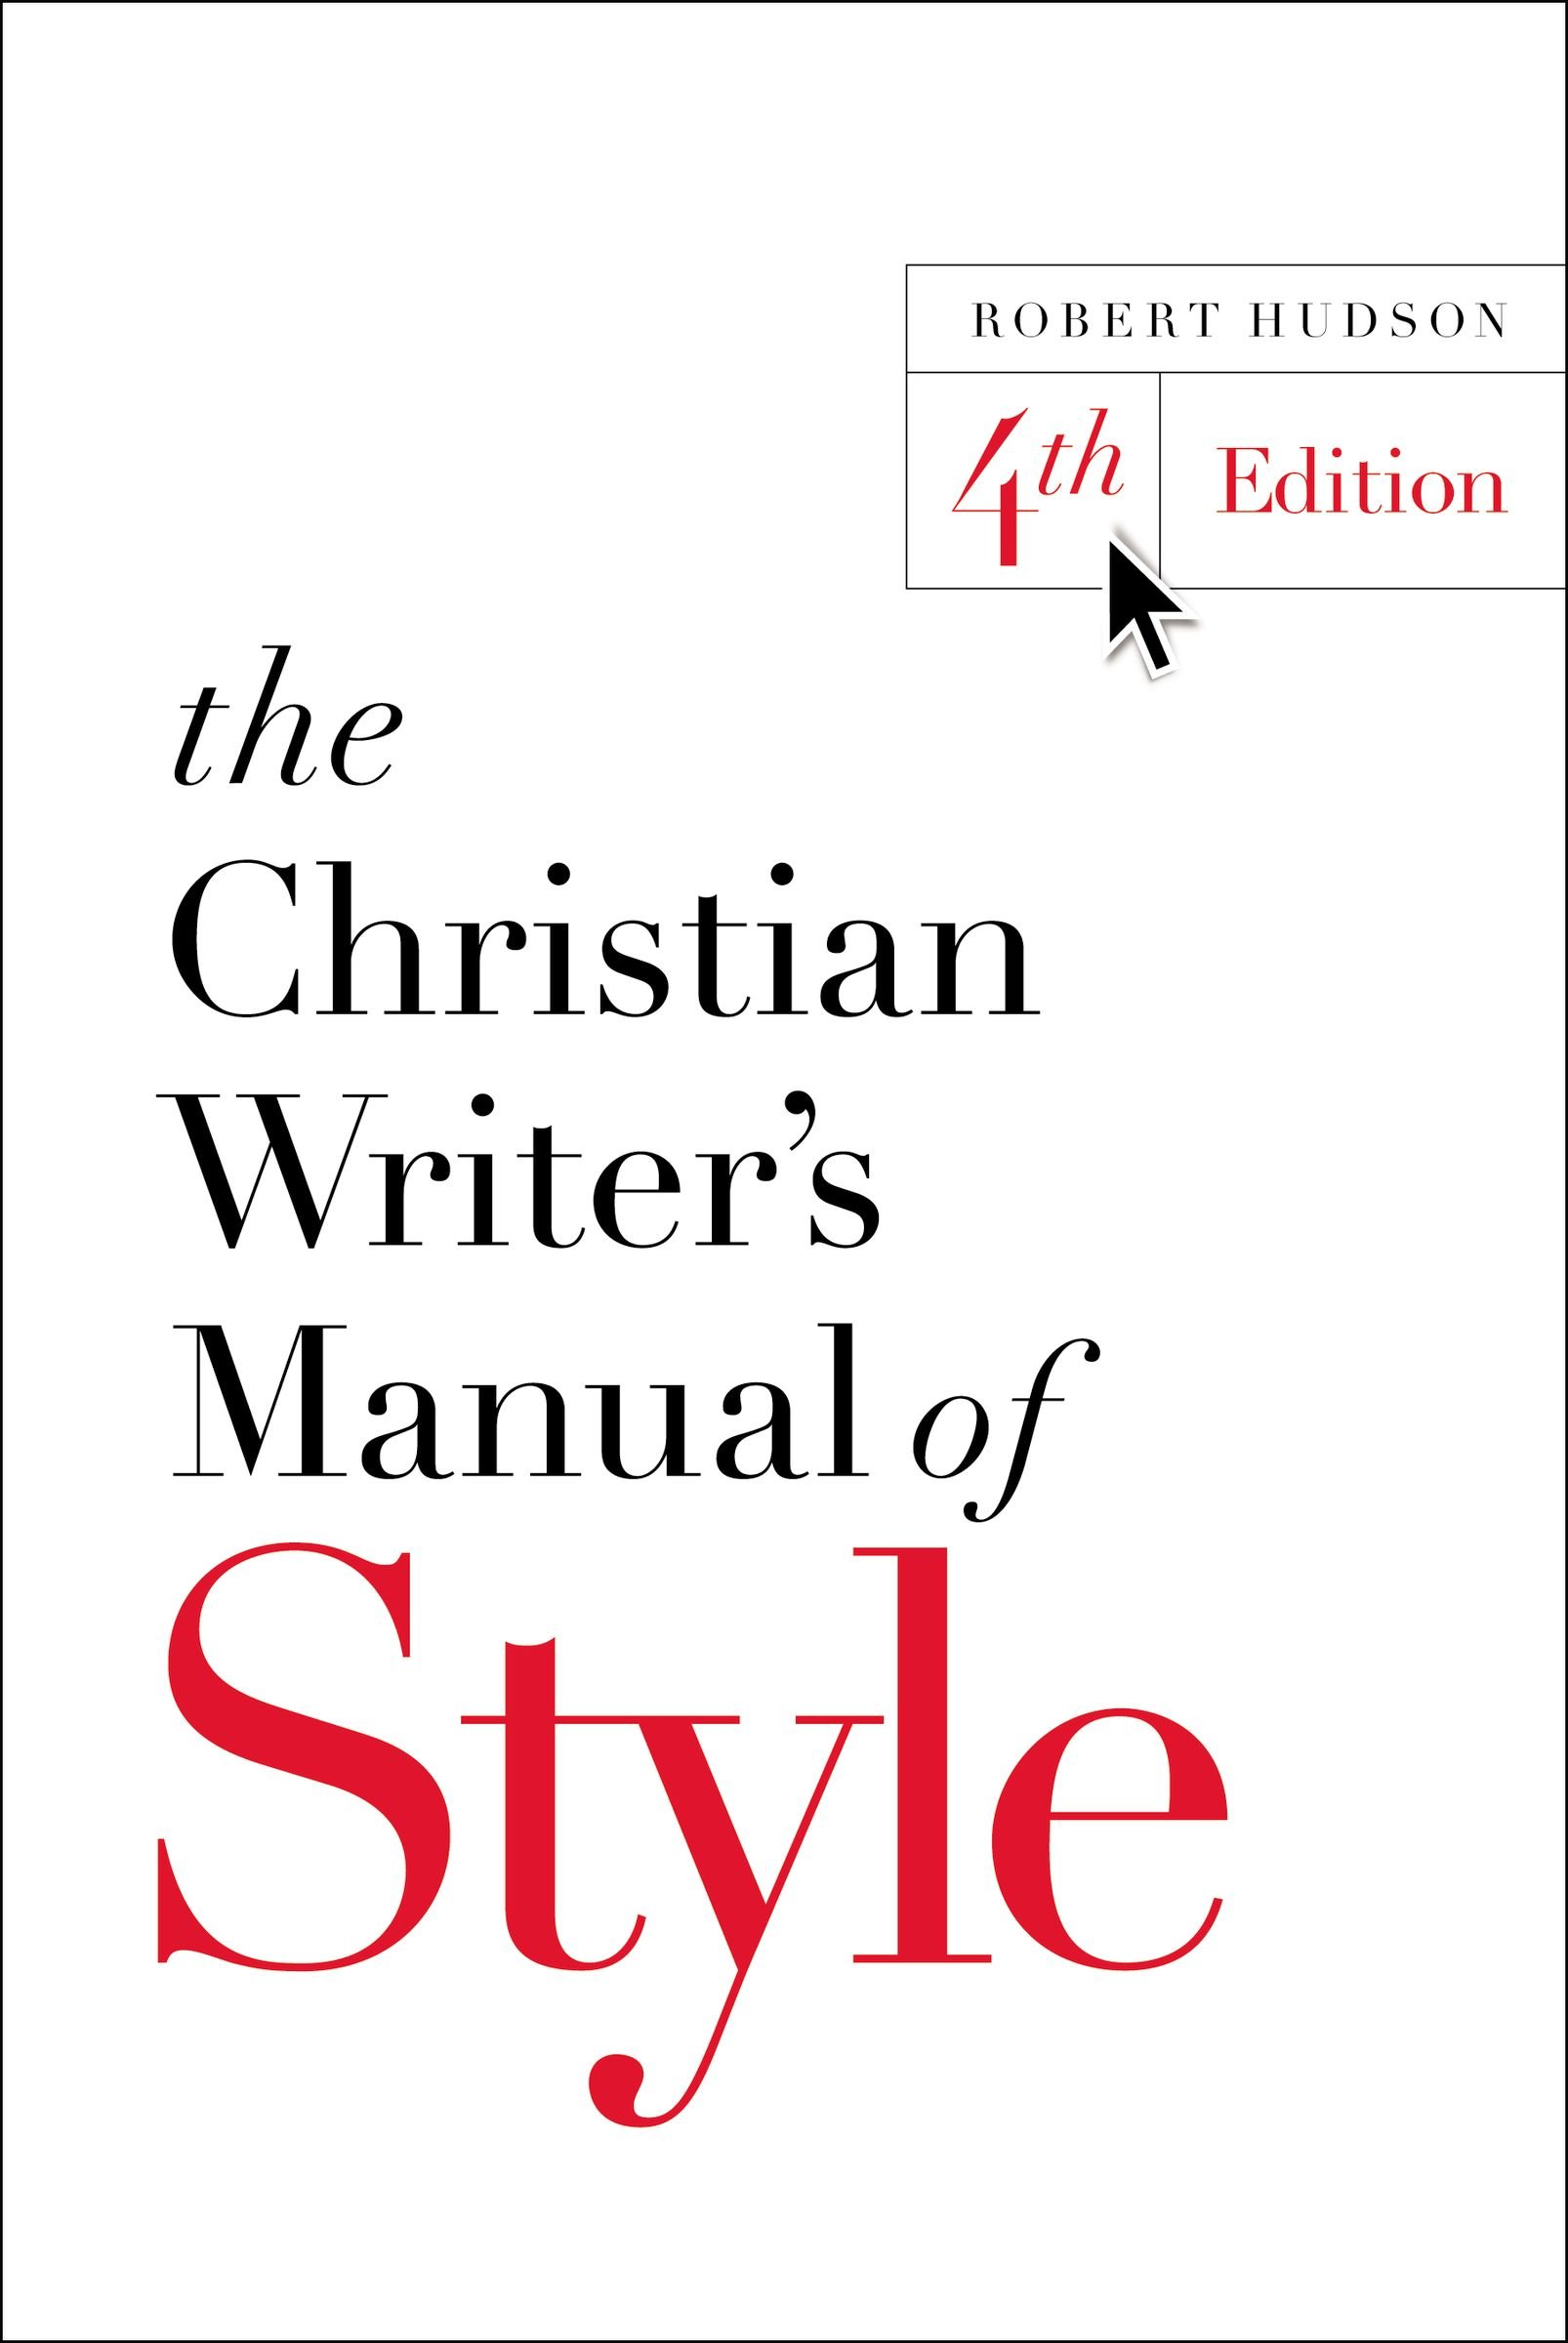 The christian writers manual of style.jpg